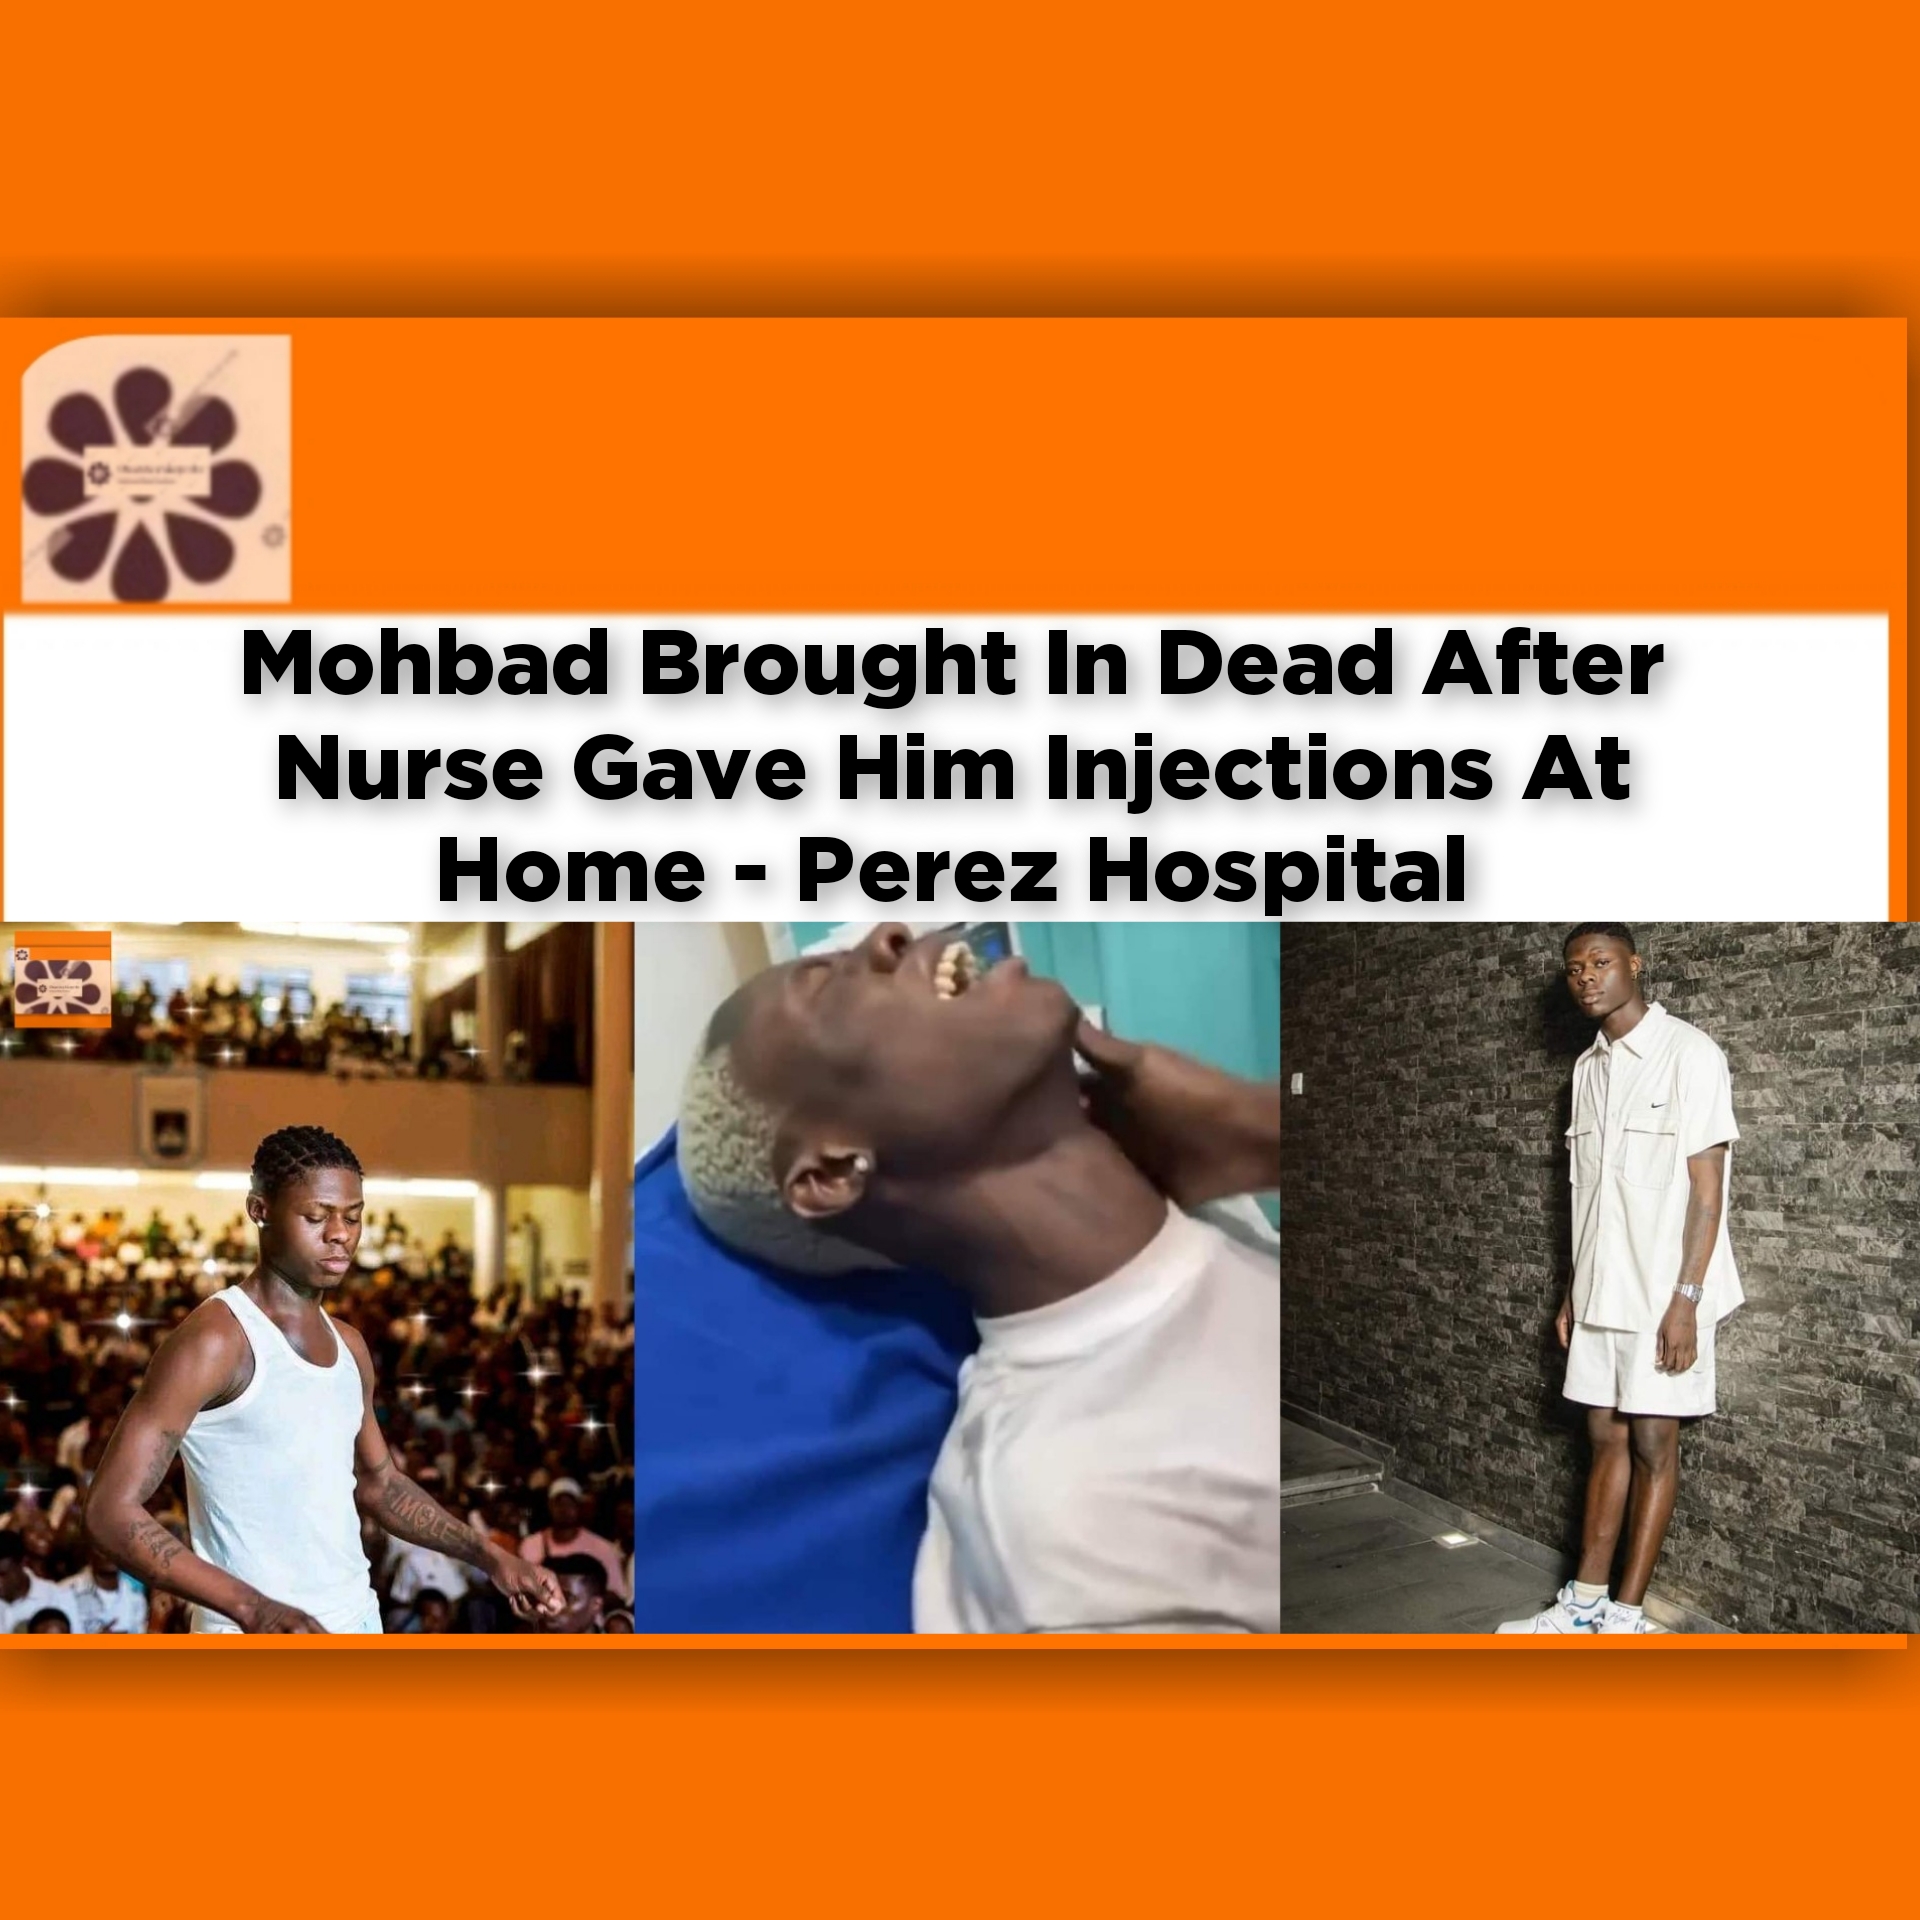 Mohbad Brought In Dead After Nurse Gave Him Injections At Home - Perez Hospital ~ OsazuwaAkonedo #FirstBank